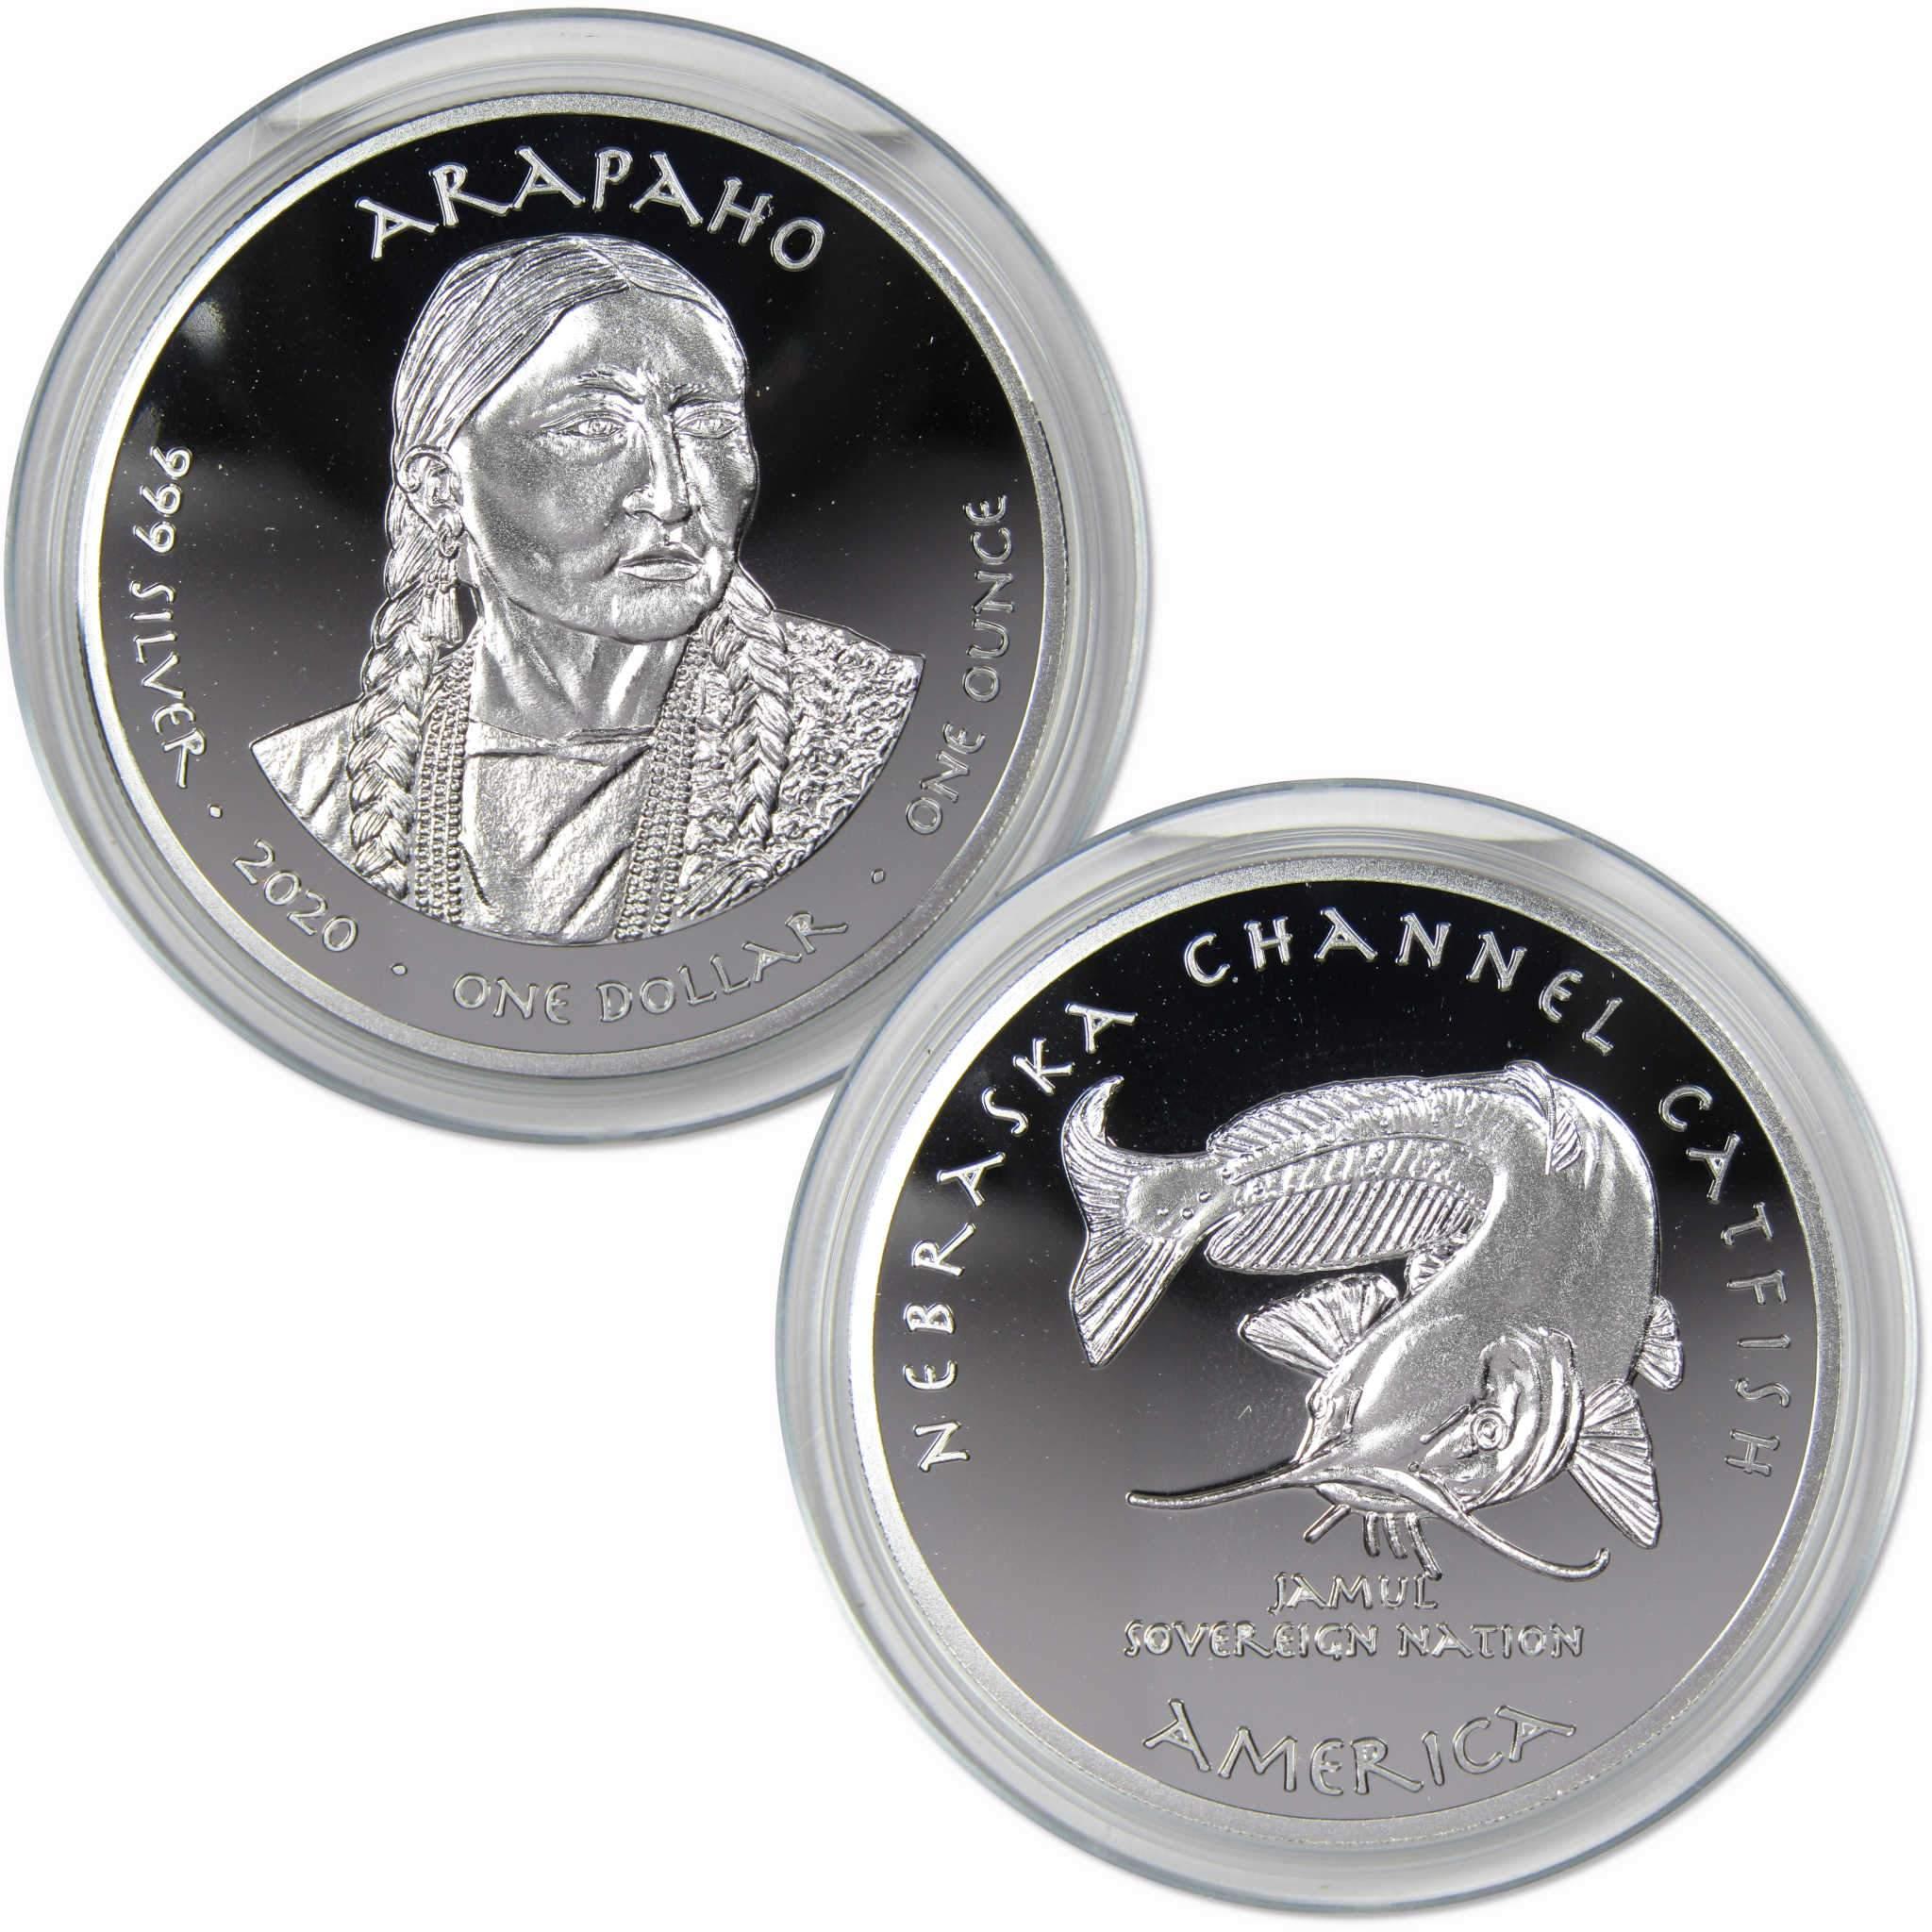 2020 Native American Jamul Arapaho Channel Catfish 1 oz .999 Silver $1 Proof